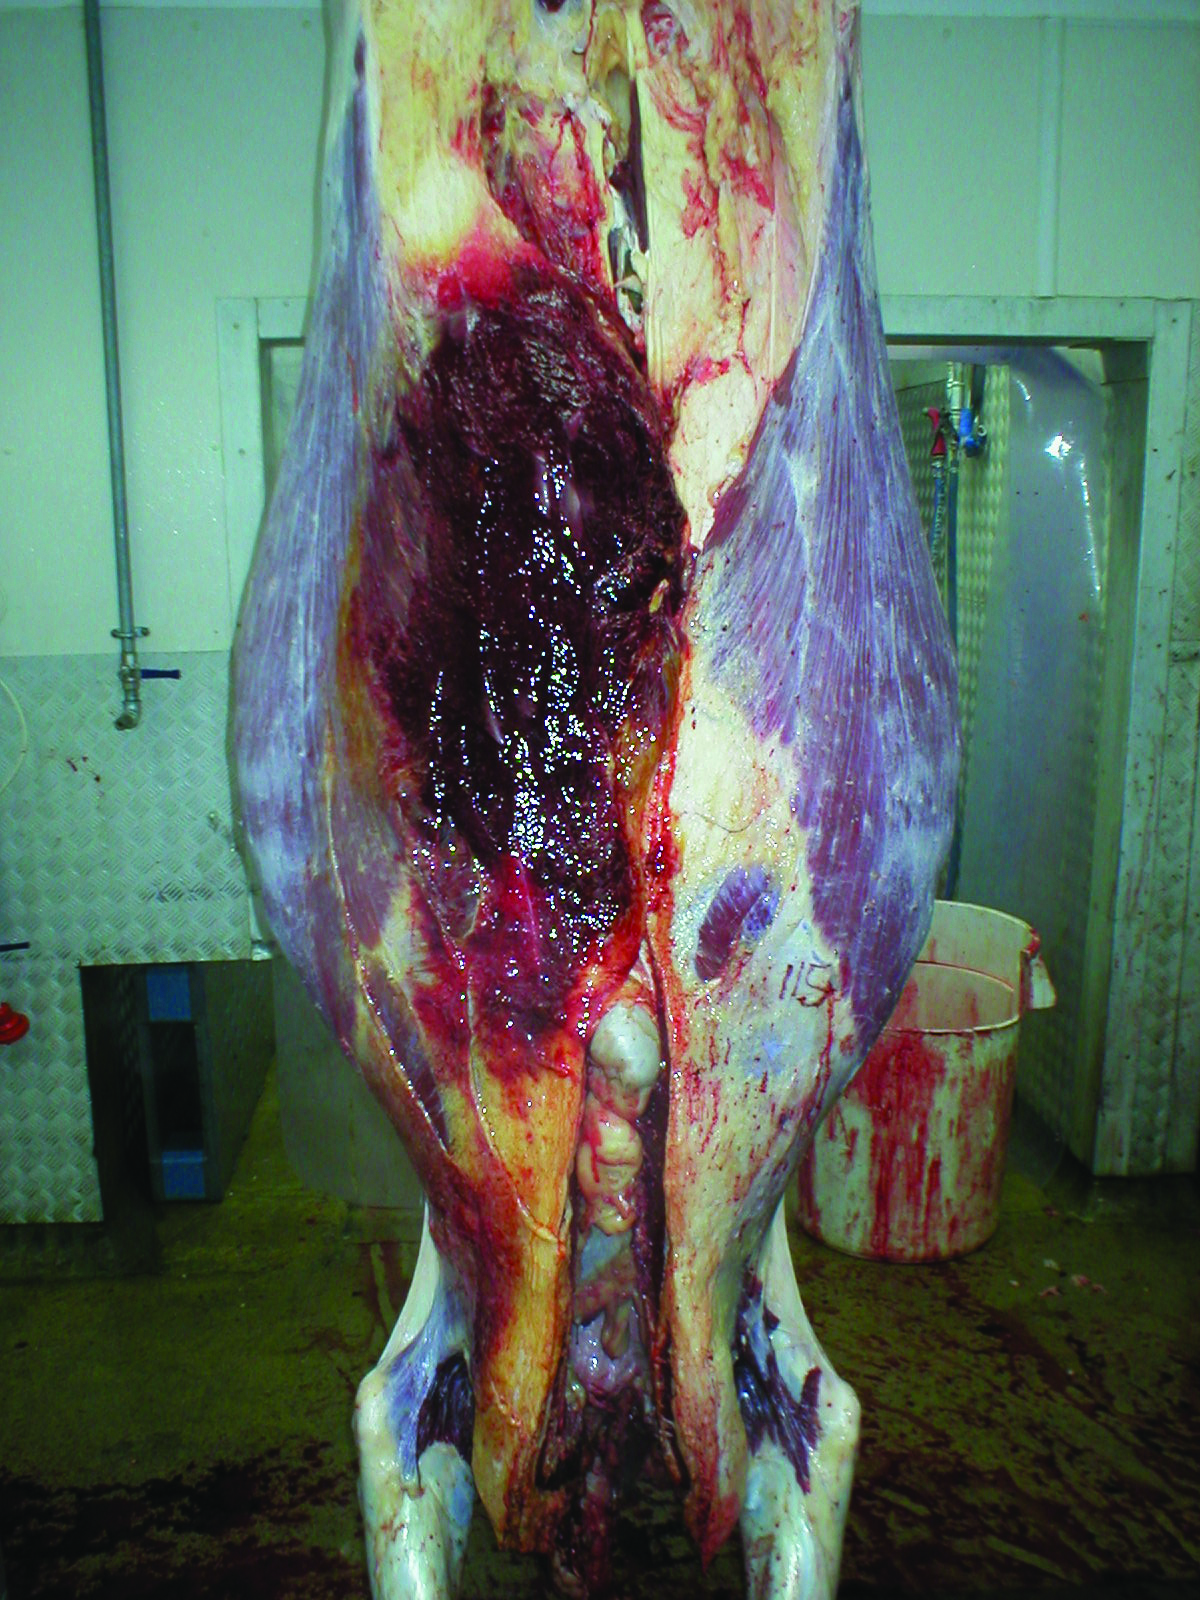 Carcase showing bruising. Image copyright of Andy Grist, University of Bristol.